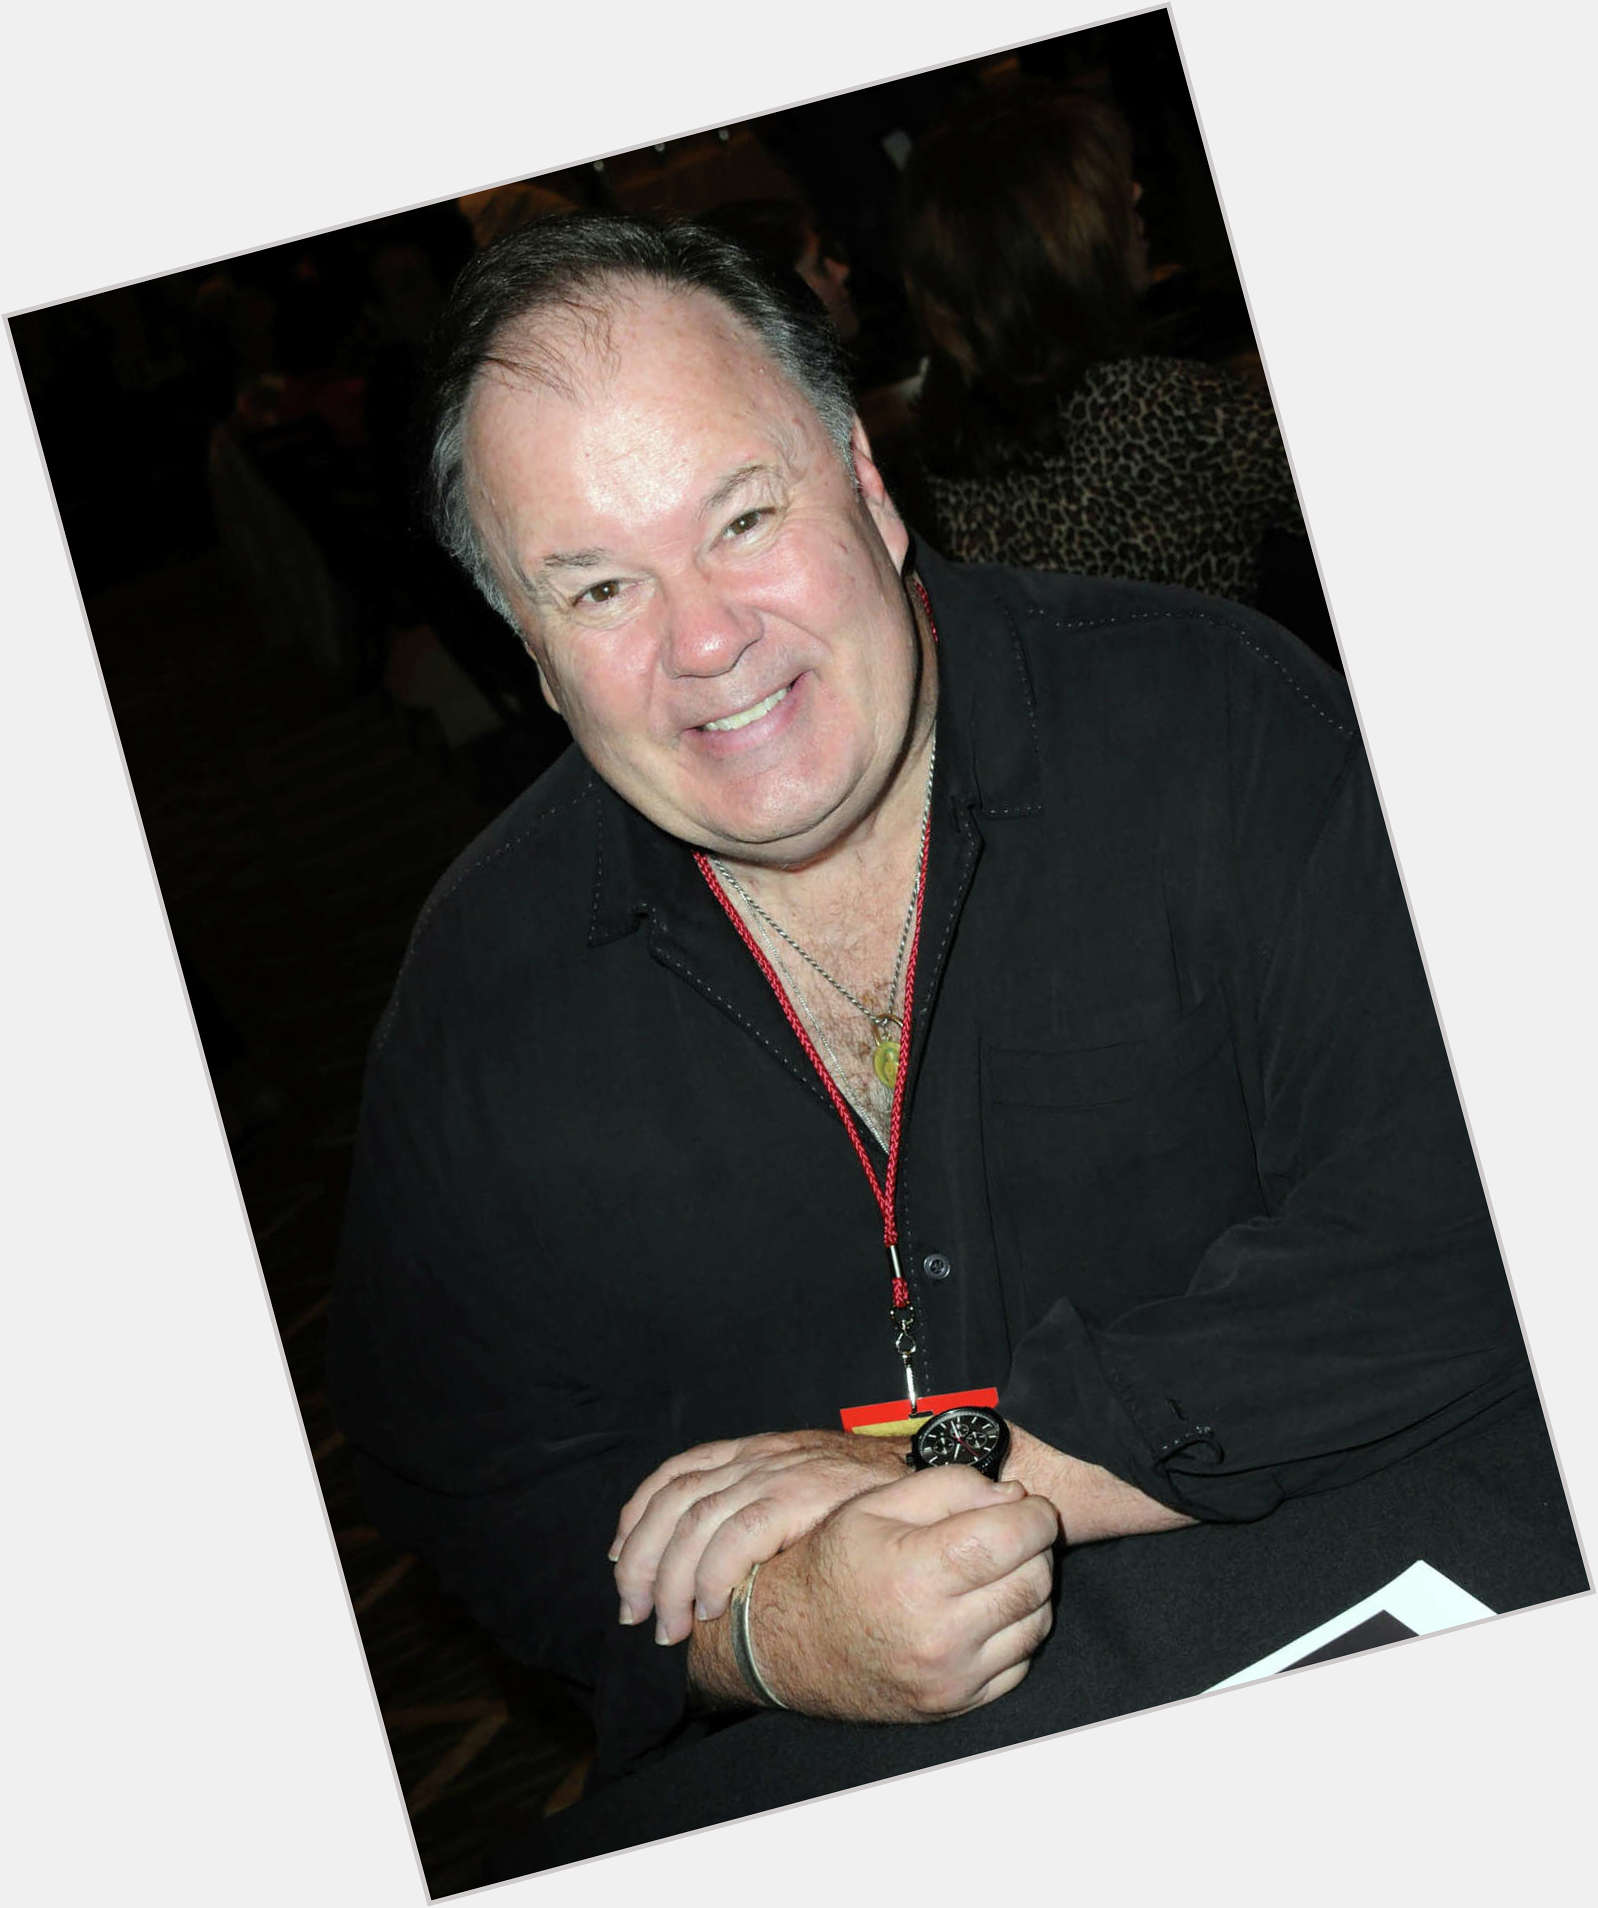 <a href="/hot-men/dennis-haskins/is-he-married-where-now-what-doing-why">Dennis Haskins</a>  